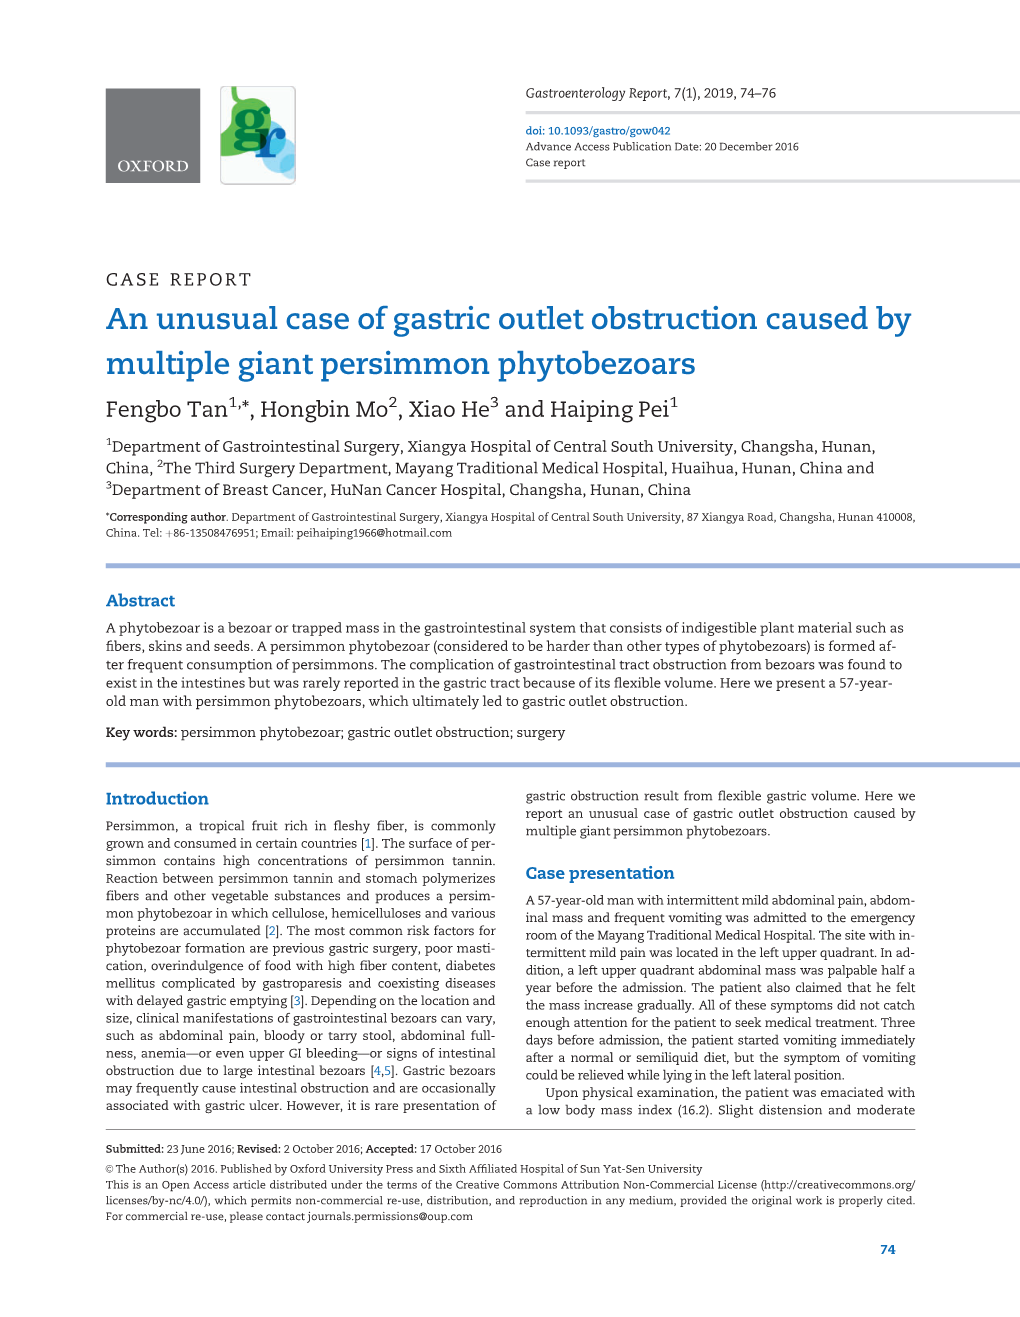 An Unusual Case of Gastric Outlet Obstruction Caused by Multiple Giant Persimmon Phytobezoars Fengbo Tan1,*, Hongbin Mo2, Xiao He3 and Haiping Pei1